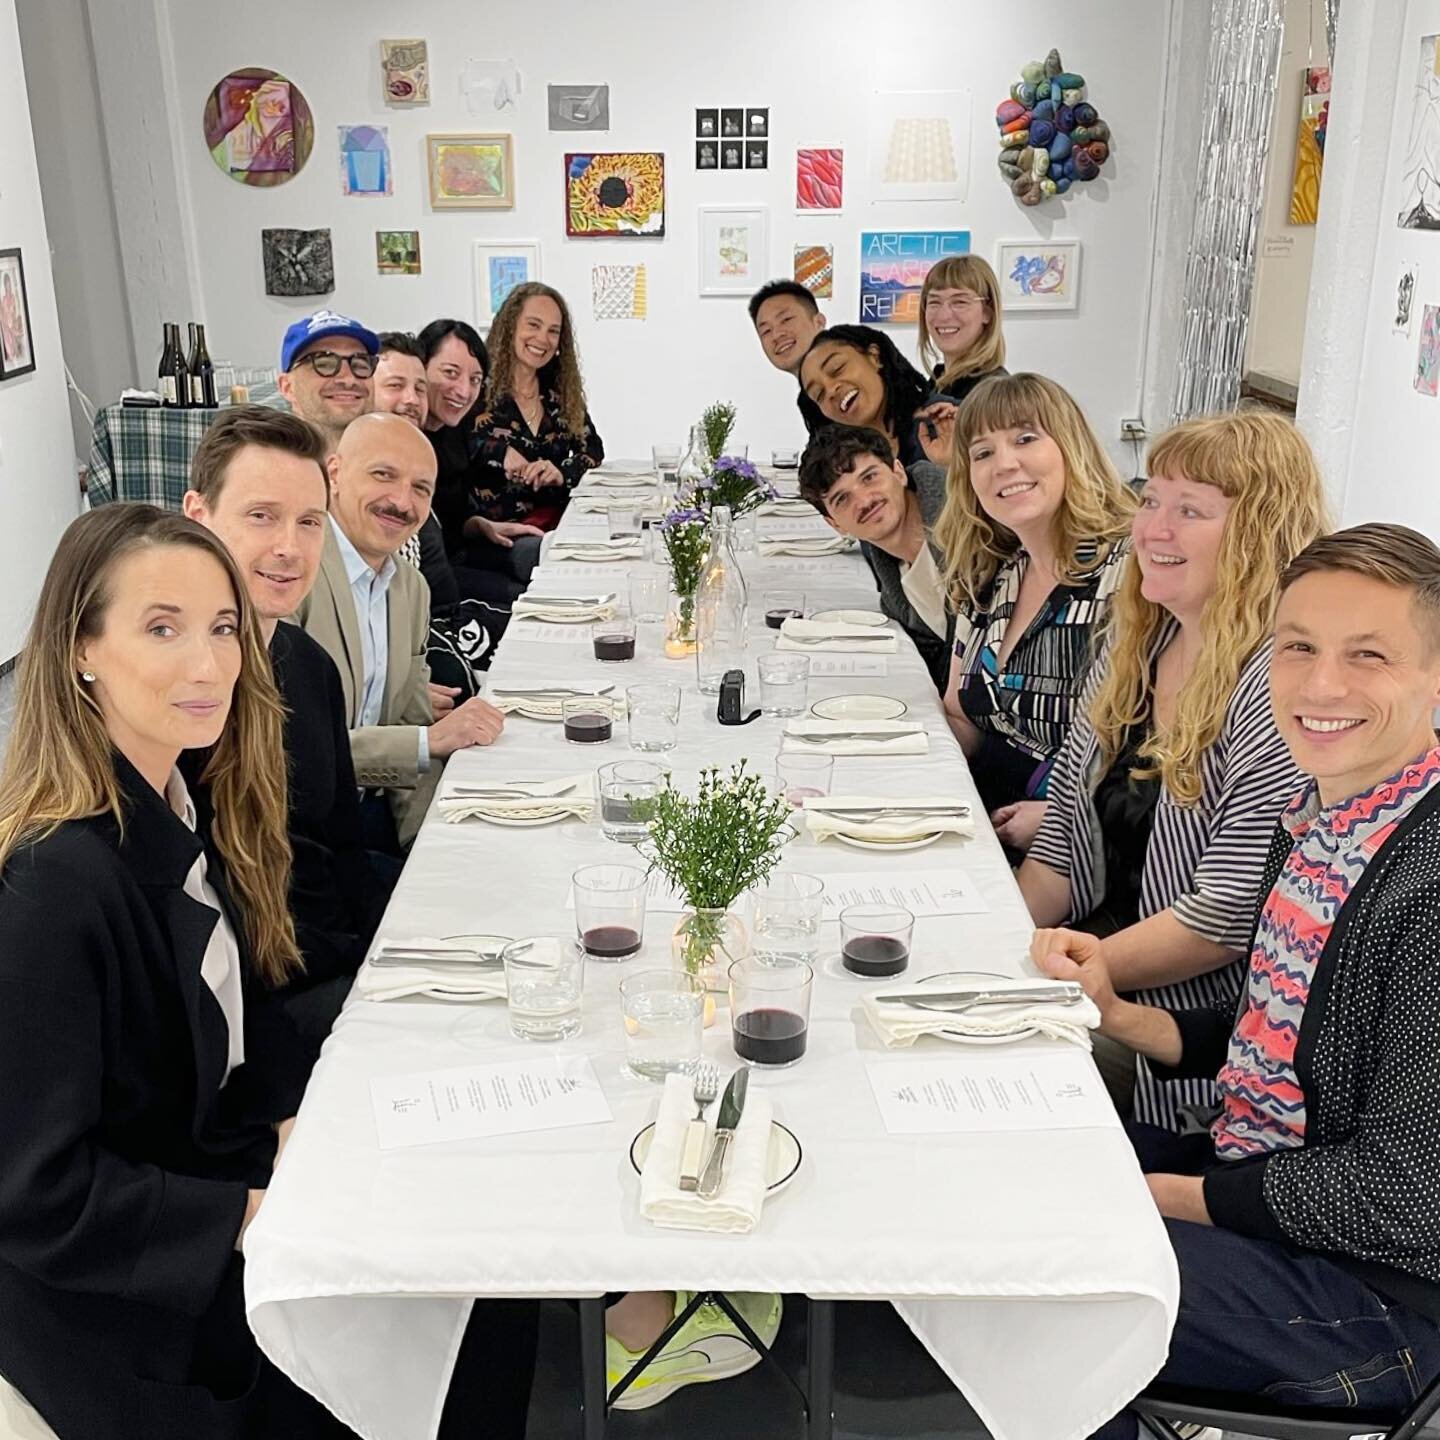 What is the plural noun for OyG co-directors past and present? A brood, a gaggle, a school or a &hellip;??? Whatever it is, we gathered last night for a lovely dinner in the gallery surrounded by our 10 year fundraiser exhibition of 100 artworks! And